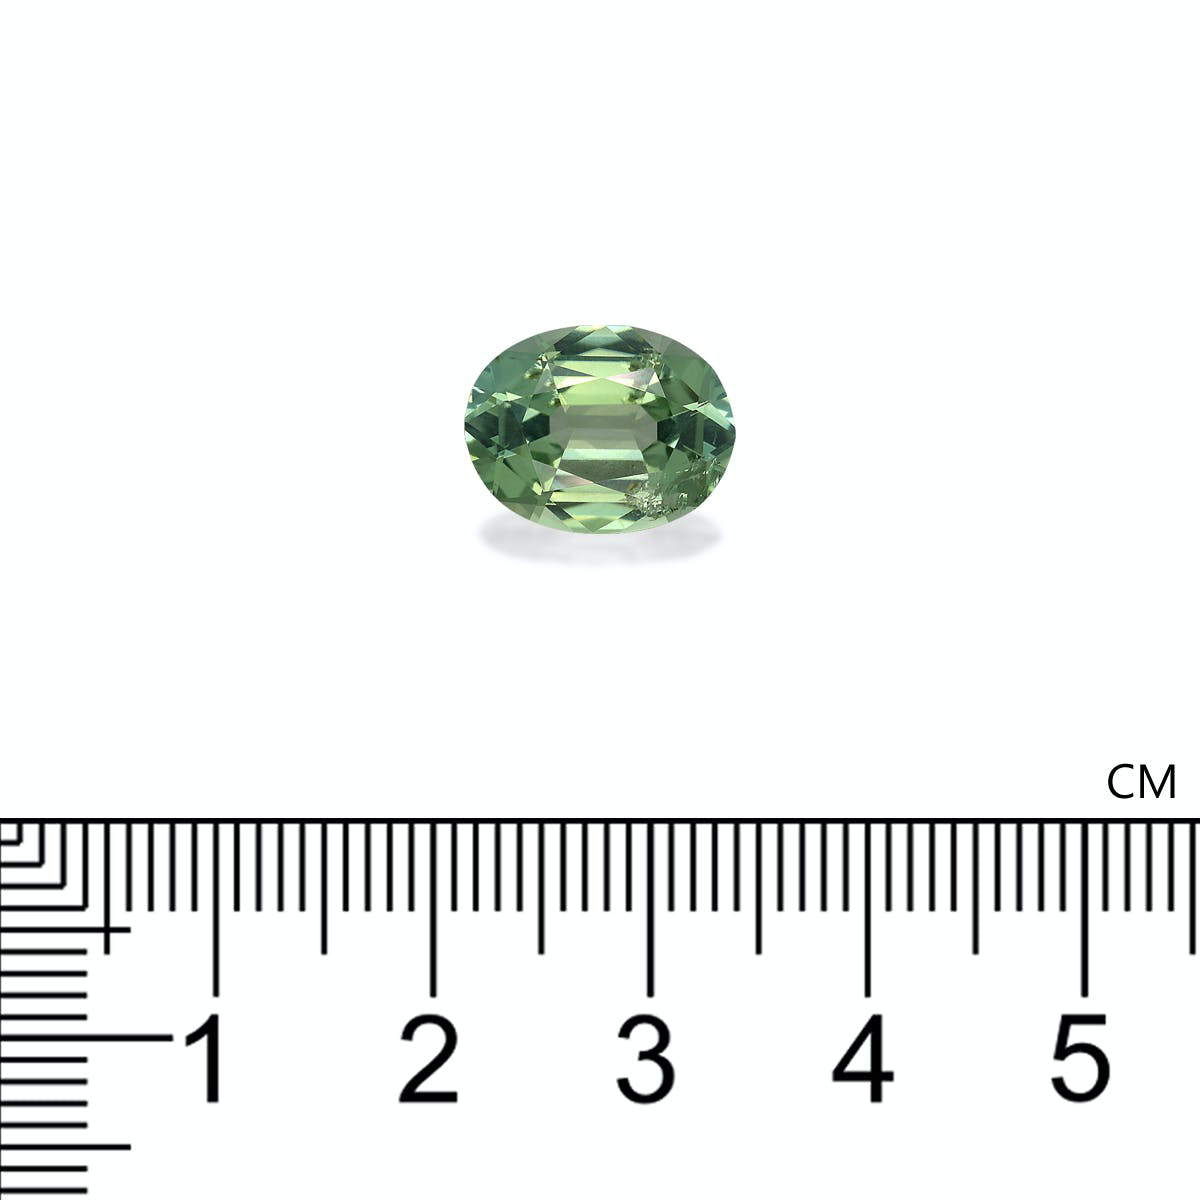 Picture of Cotton Green Tourmaline 3.97ct (TG1428)